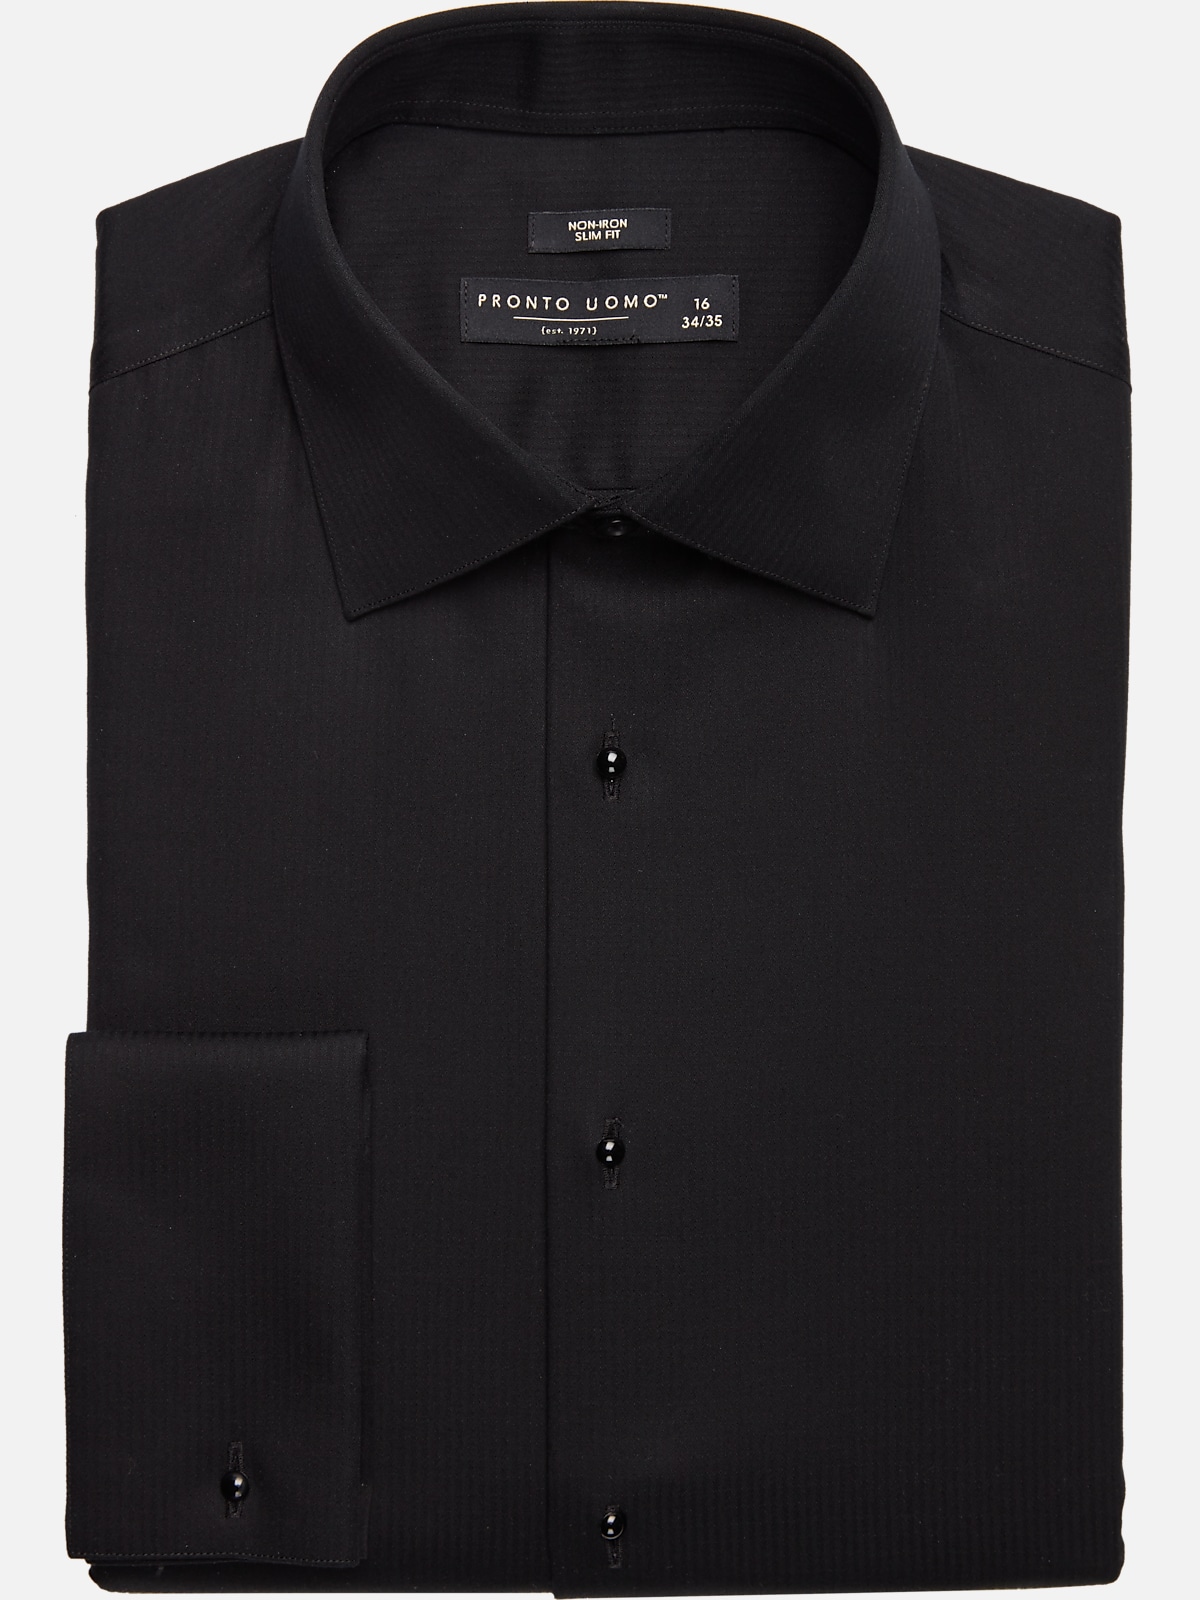 Pronto Uomo Slim Fit French Cuff Tuxedo Formal Shirt | All Clearance ...